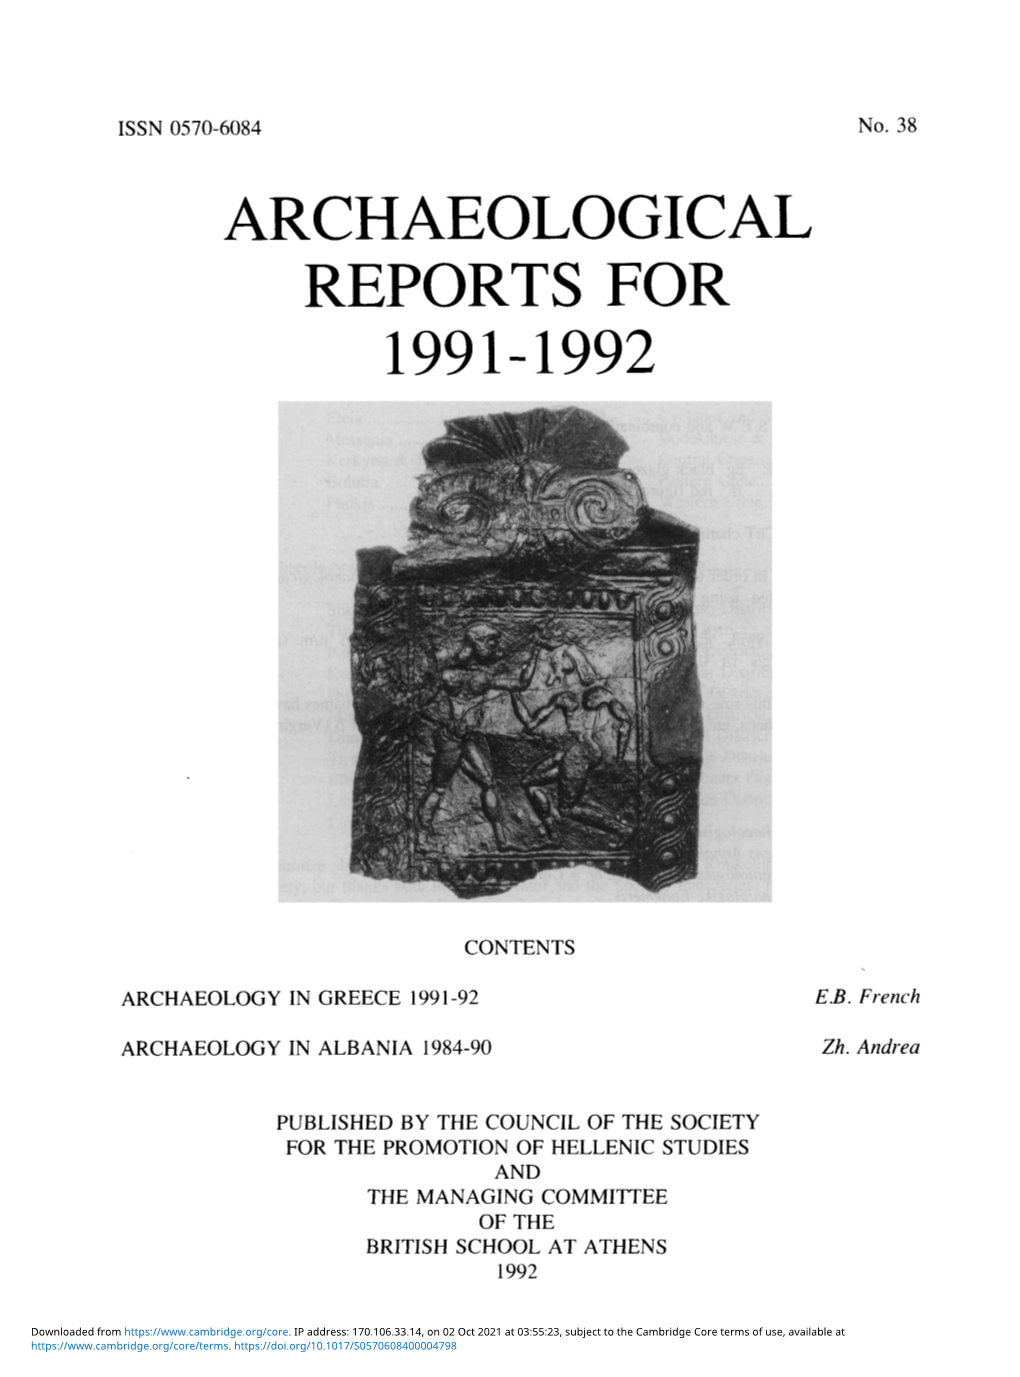 Archaeological Reports for 1991-1992